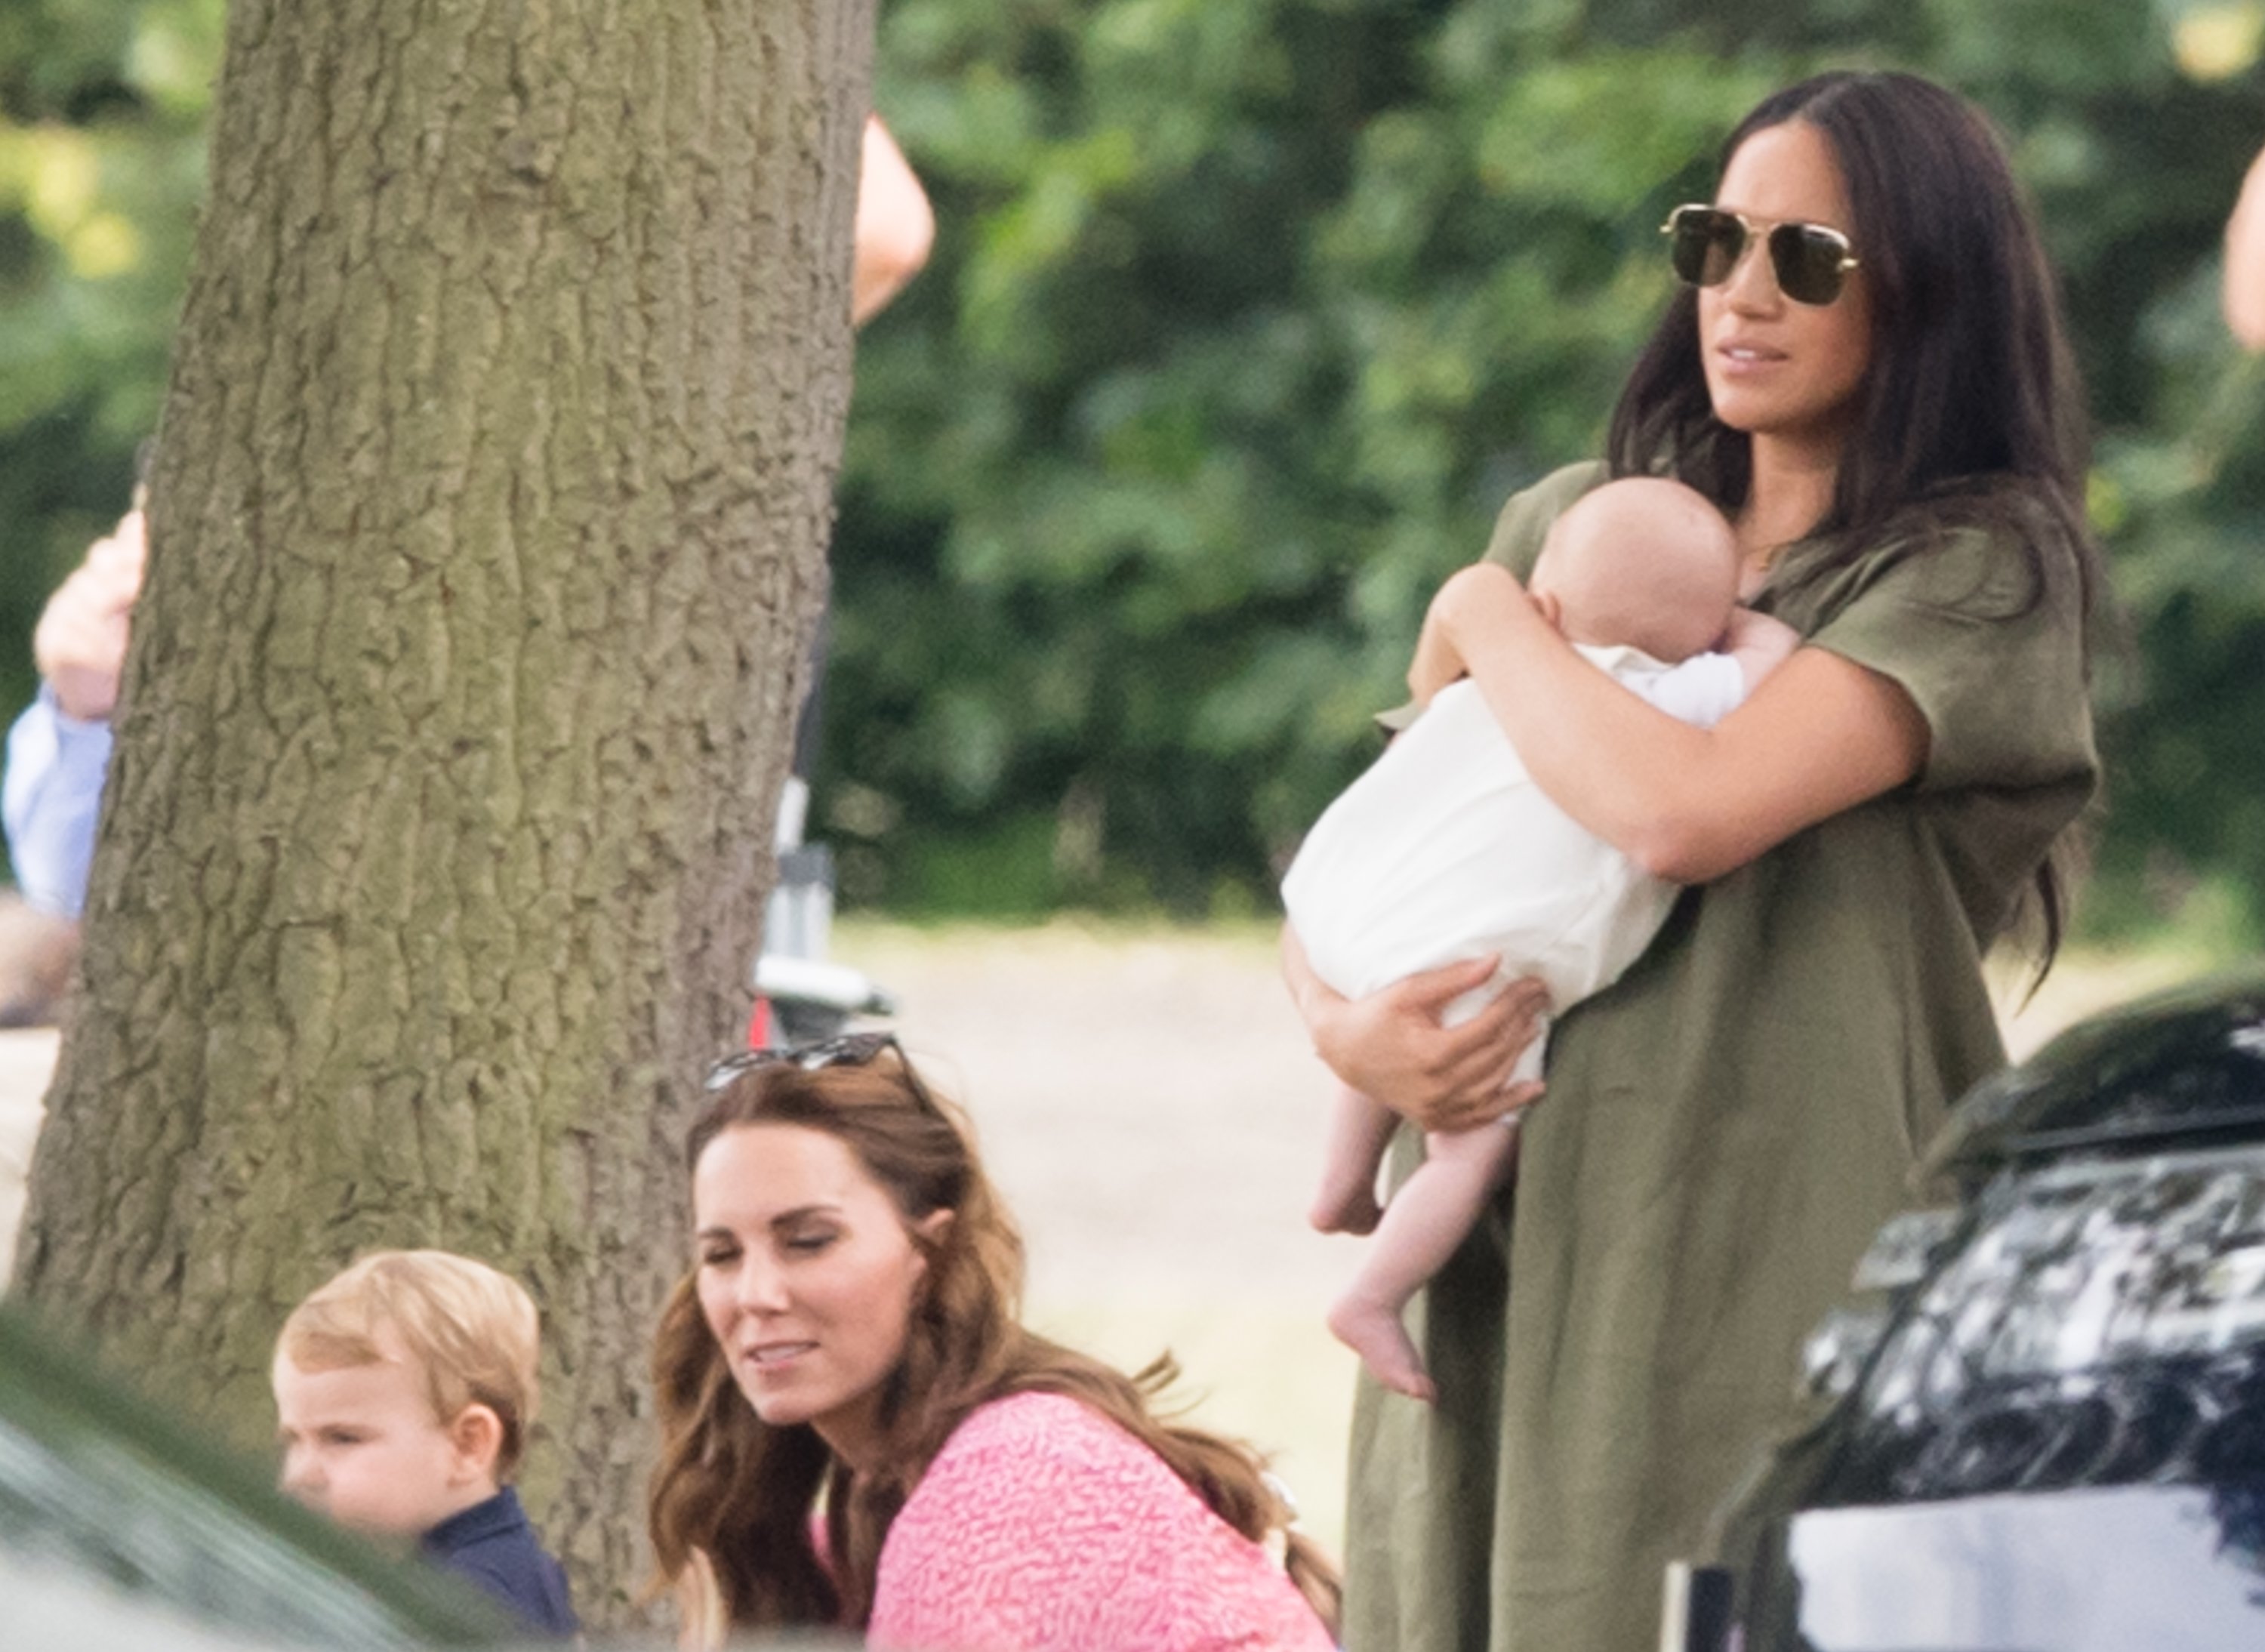 Meghan, Duchess of Sussex and Archie Harrison Mountbatten-Windsor, Catherine, Duchess of Cambridge and Prince Louis attend The King Power Royal Charity Polo Day at Billingbear Polo Club on July 10, 2019 in Wokingham, England | Source: Getty Images